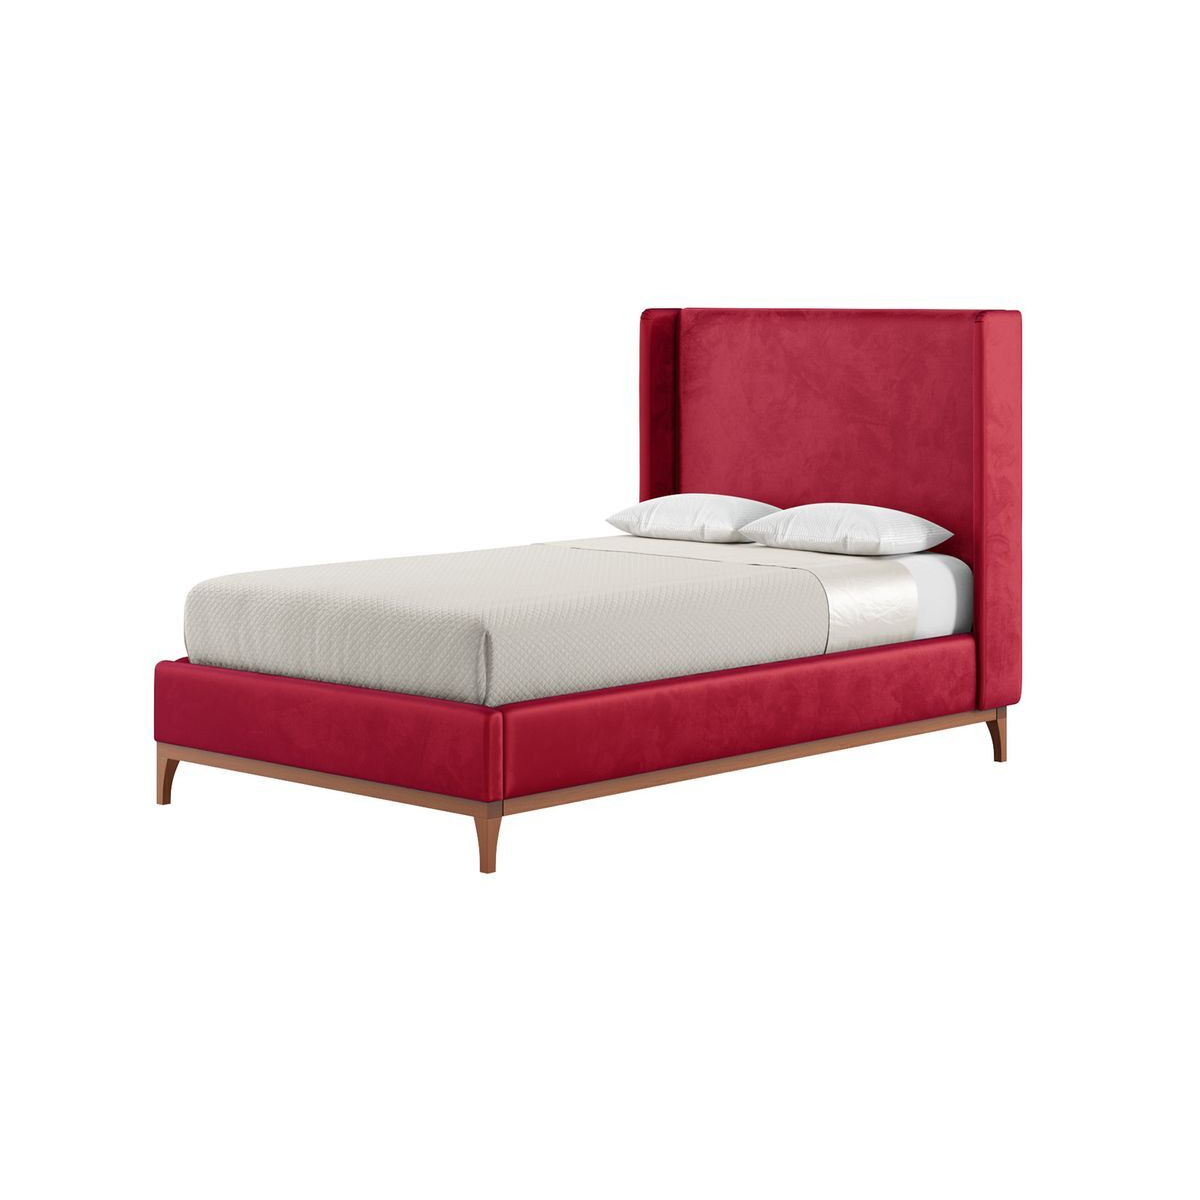 Diane 4ft Small Double Bed Frame with modern smooth wing headboard, dark red, Leg colour: aveo - image 1